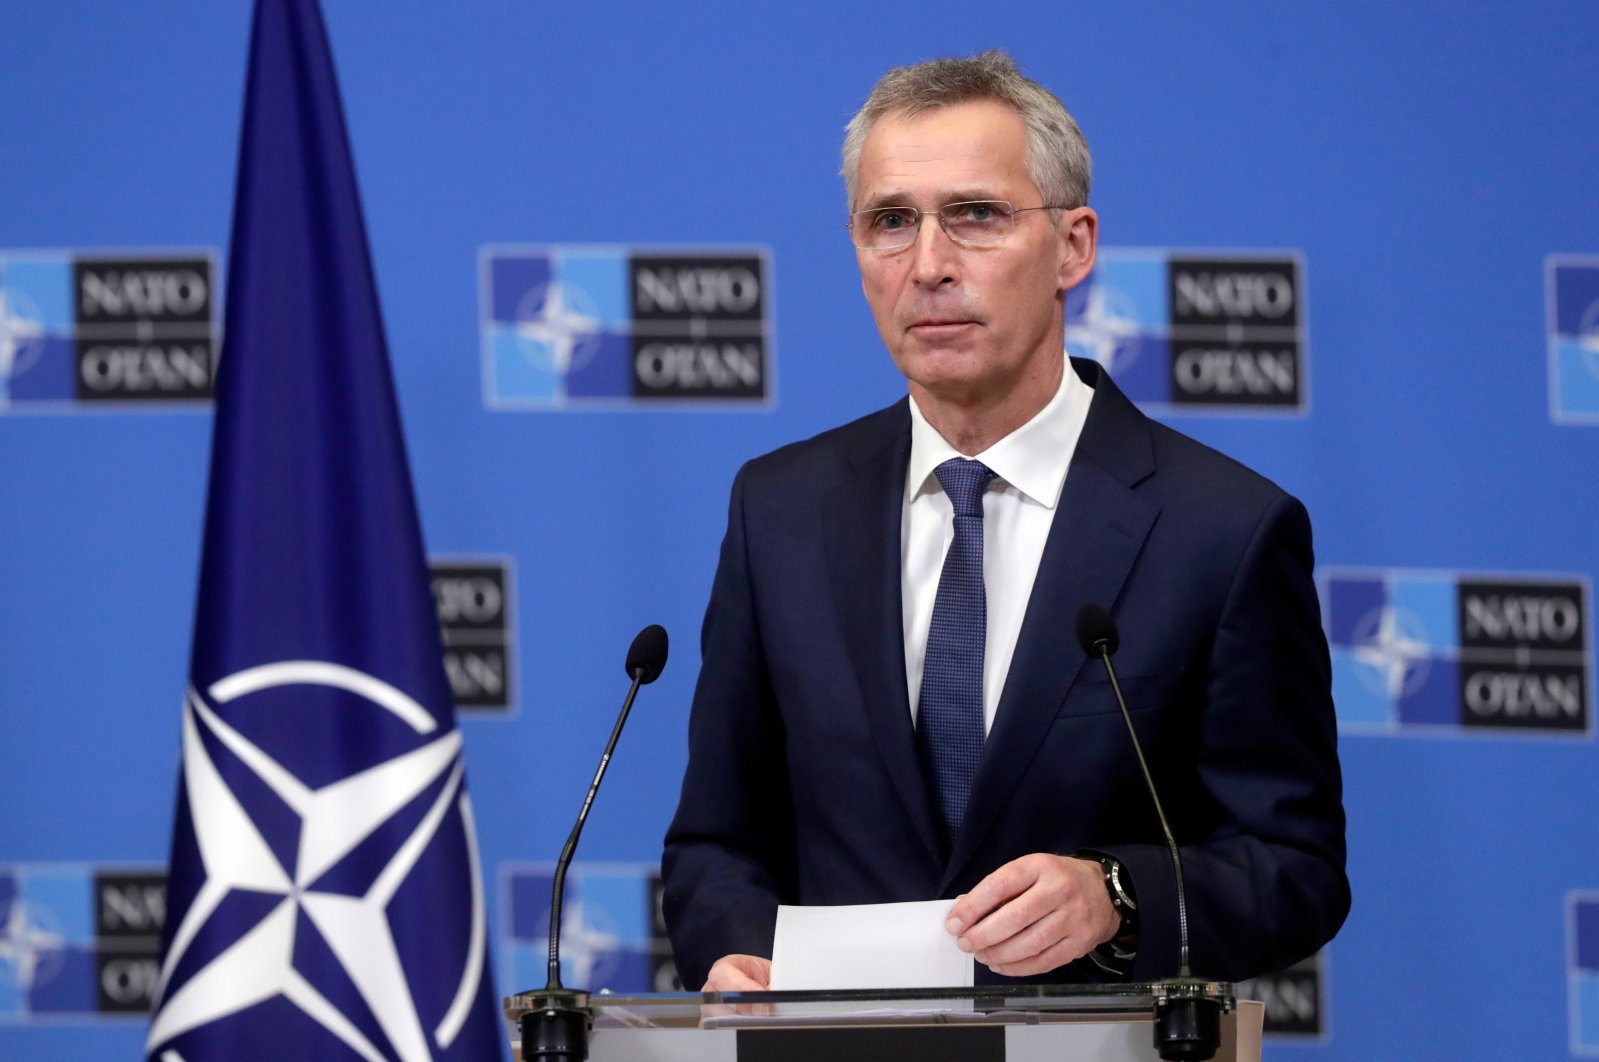 NATO Secretary-General Jens Stoltenberg gives a press briefing at the alliance's headquarters in Brussels, Belgium, Jan. 14, 2021. (Reuters Photo)